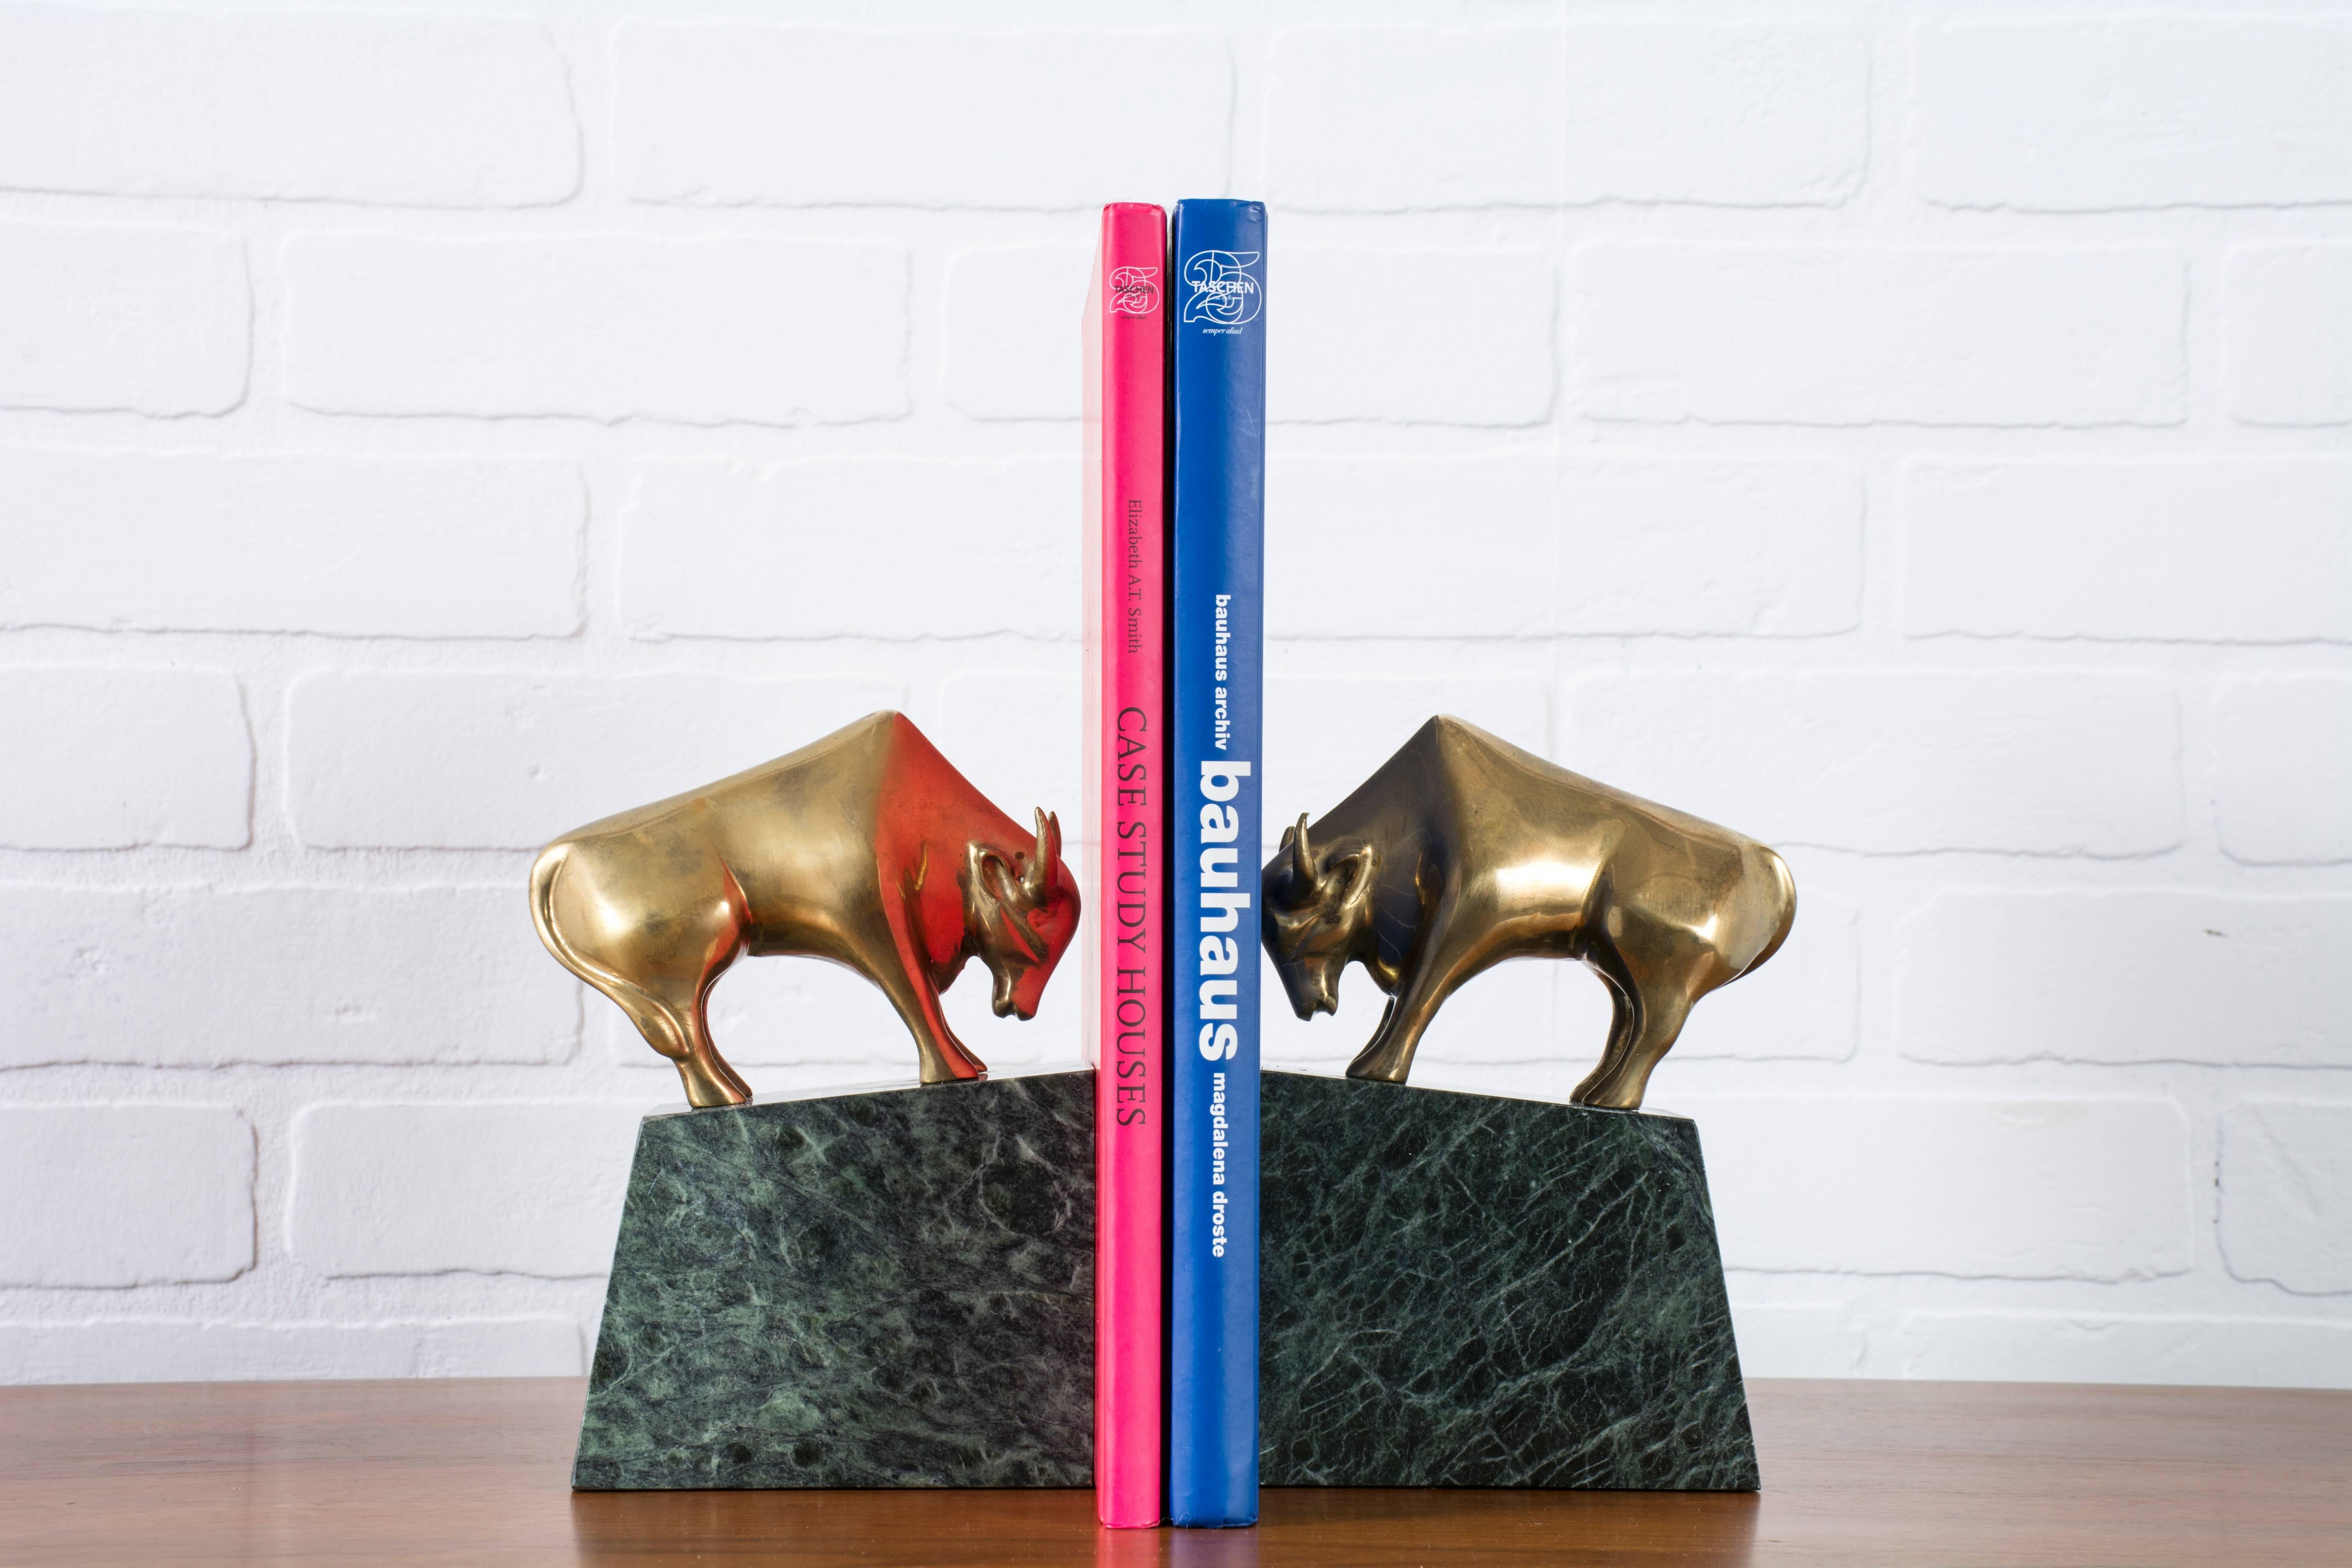 Pair of Vintage Bull Bookends 1